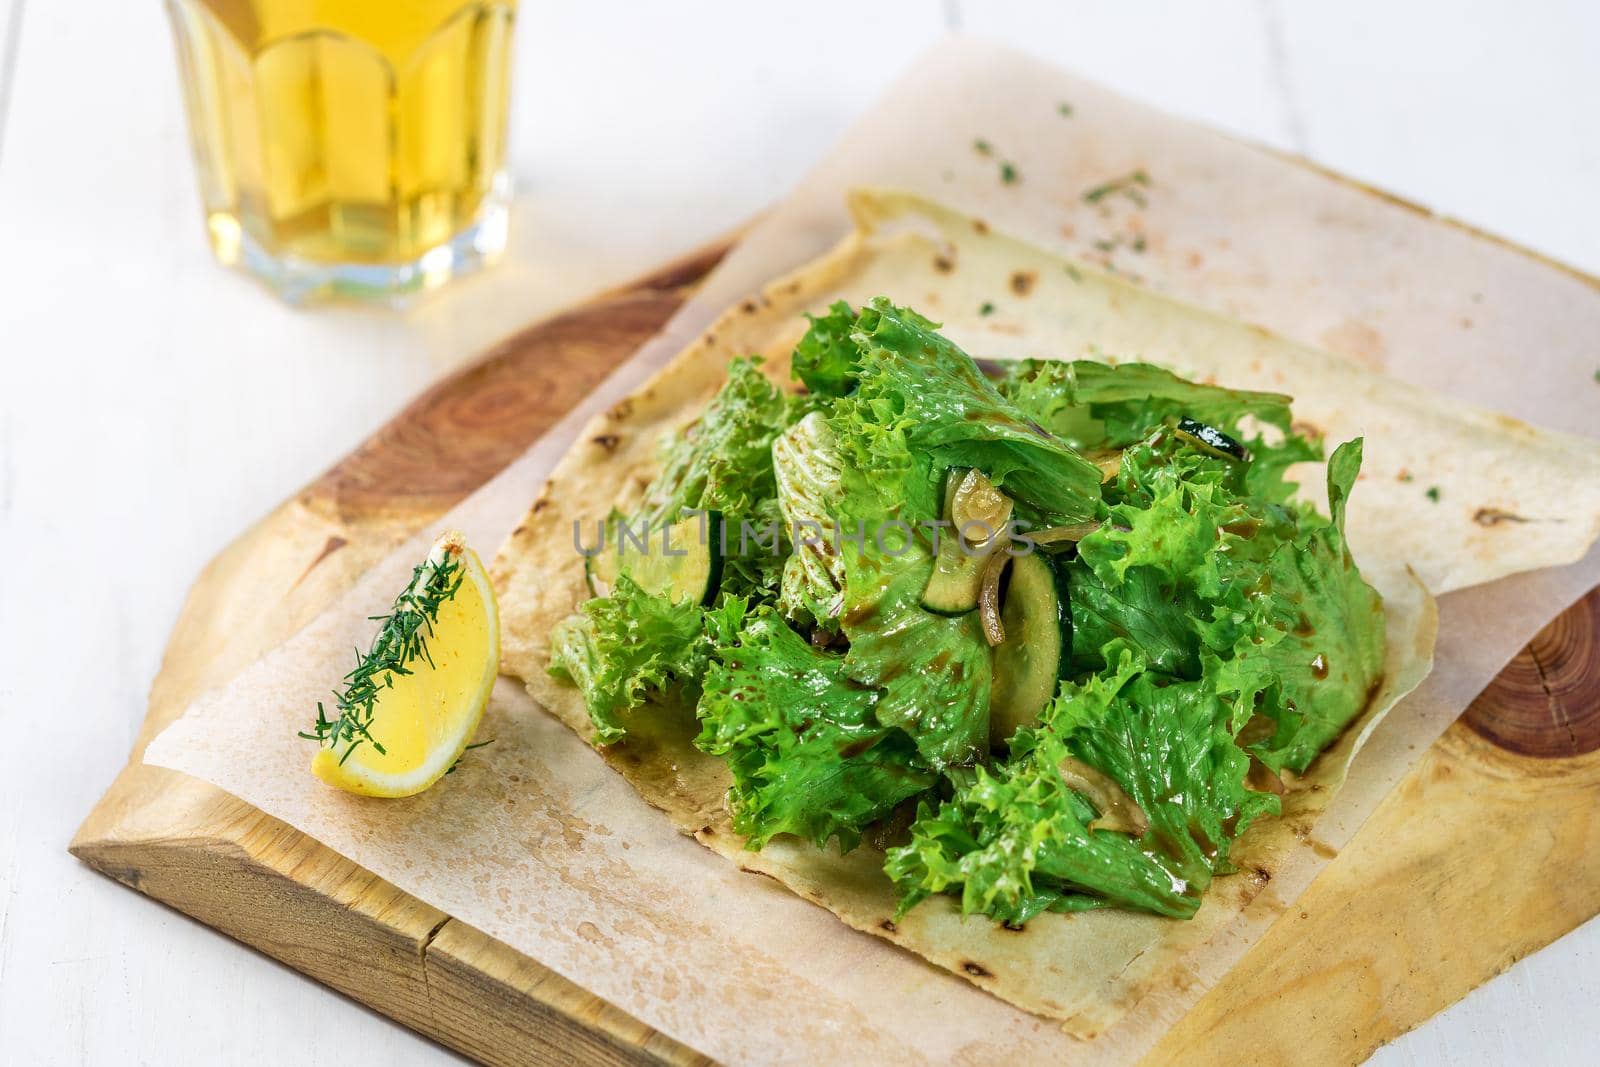 Vegetable salad with greens on a wooden board. A glass of light beer and salad on a white wooden table